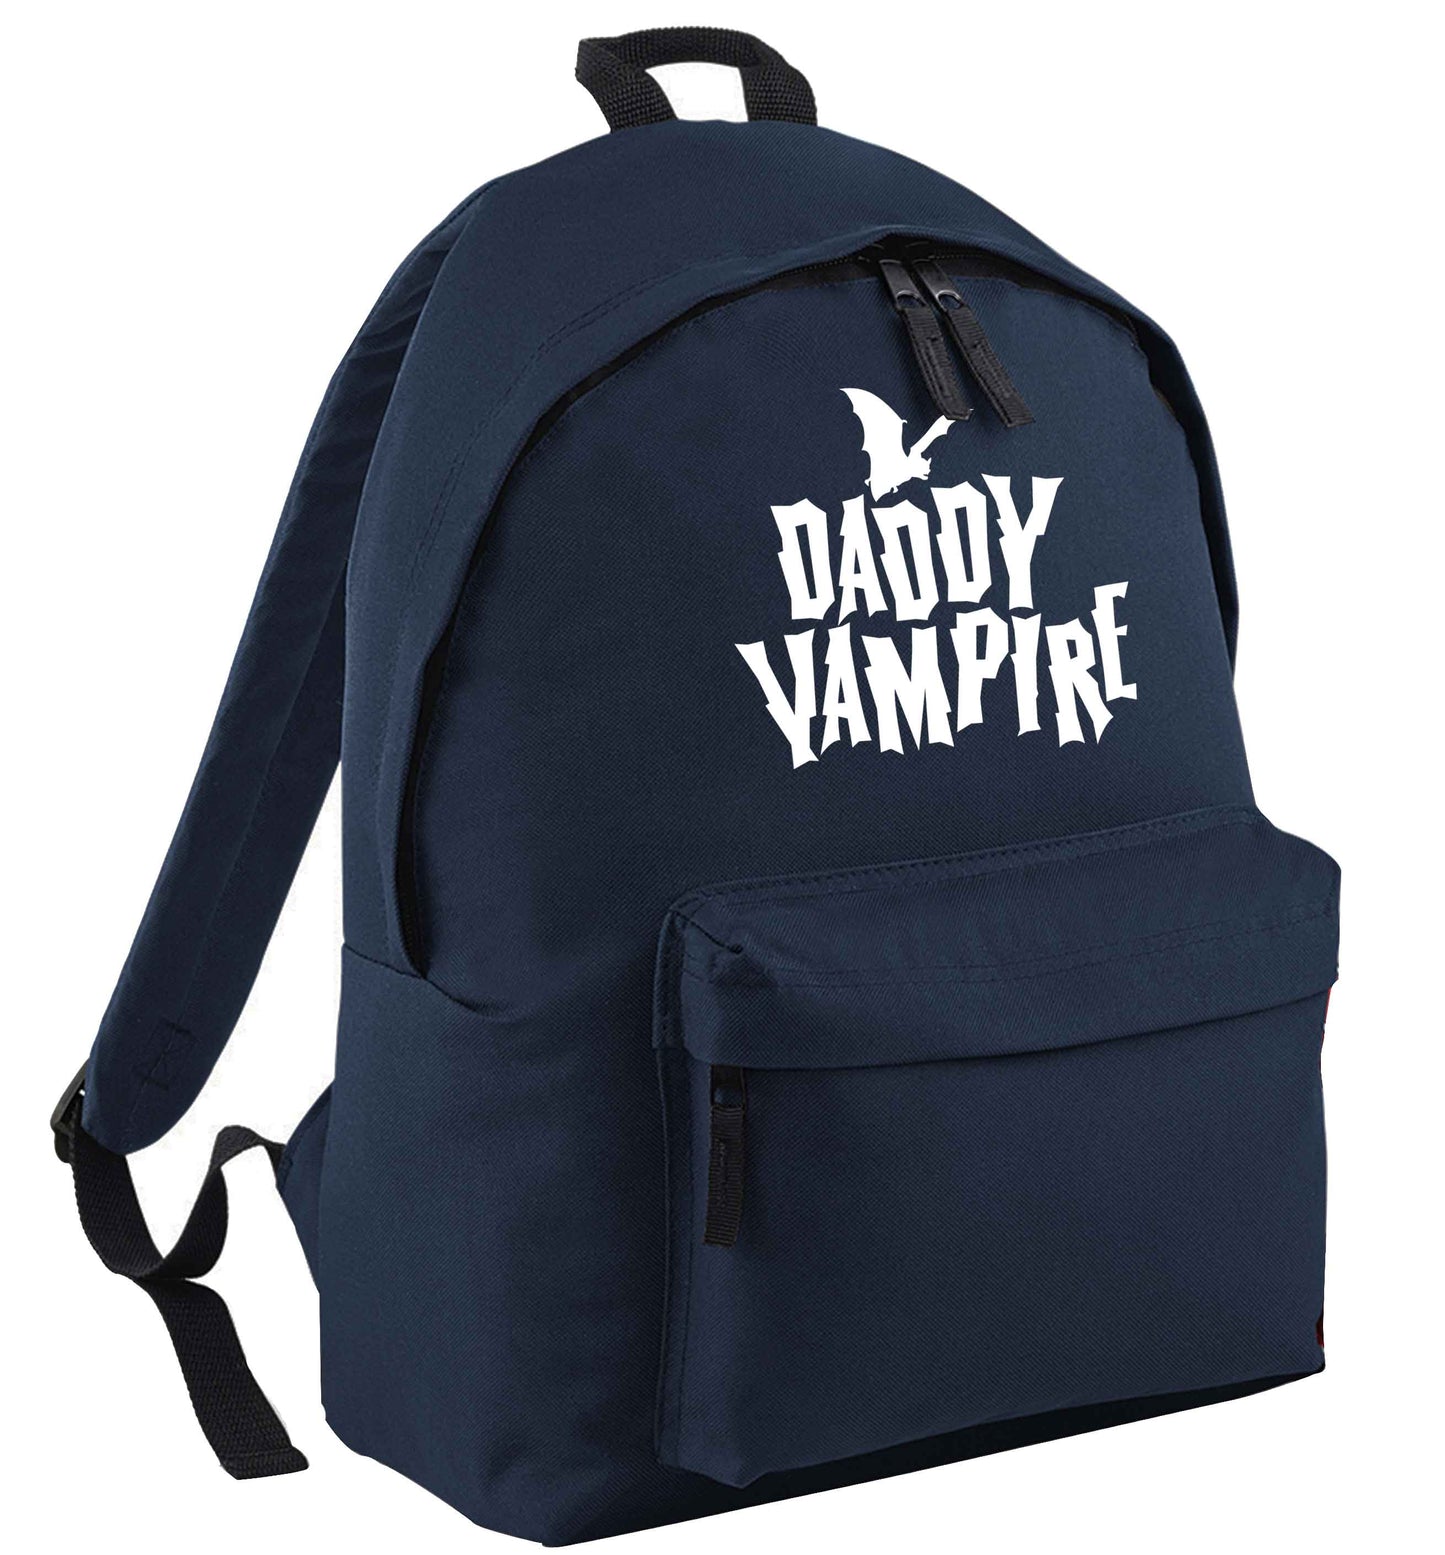 Daddy vampire navy adults backpack